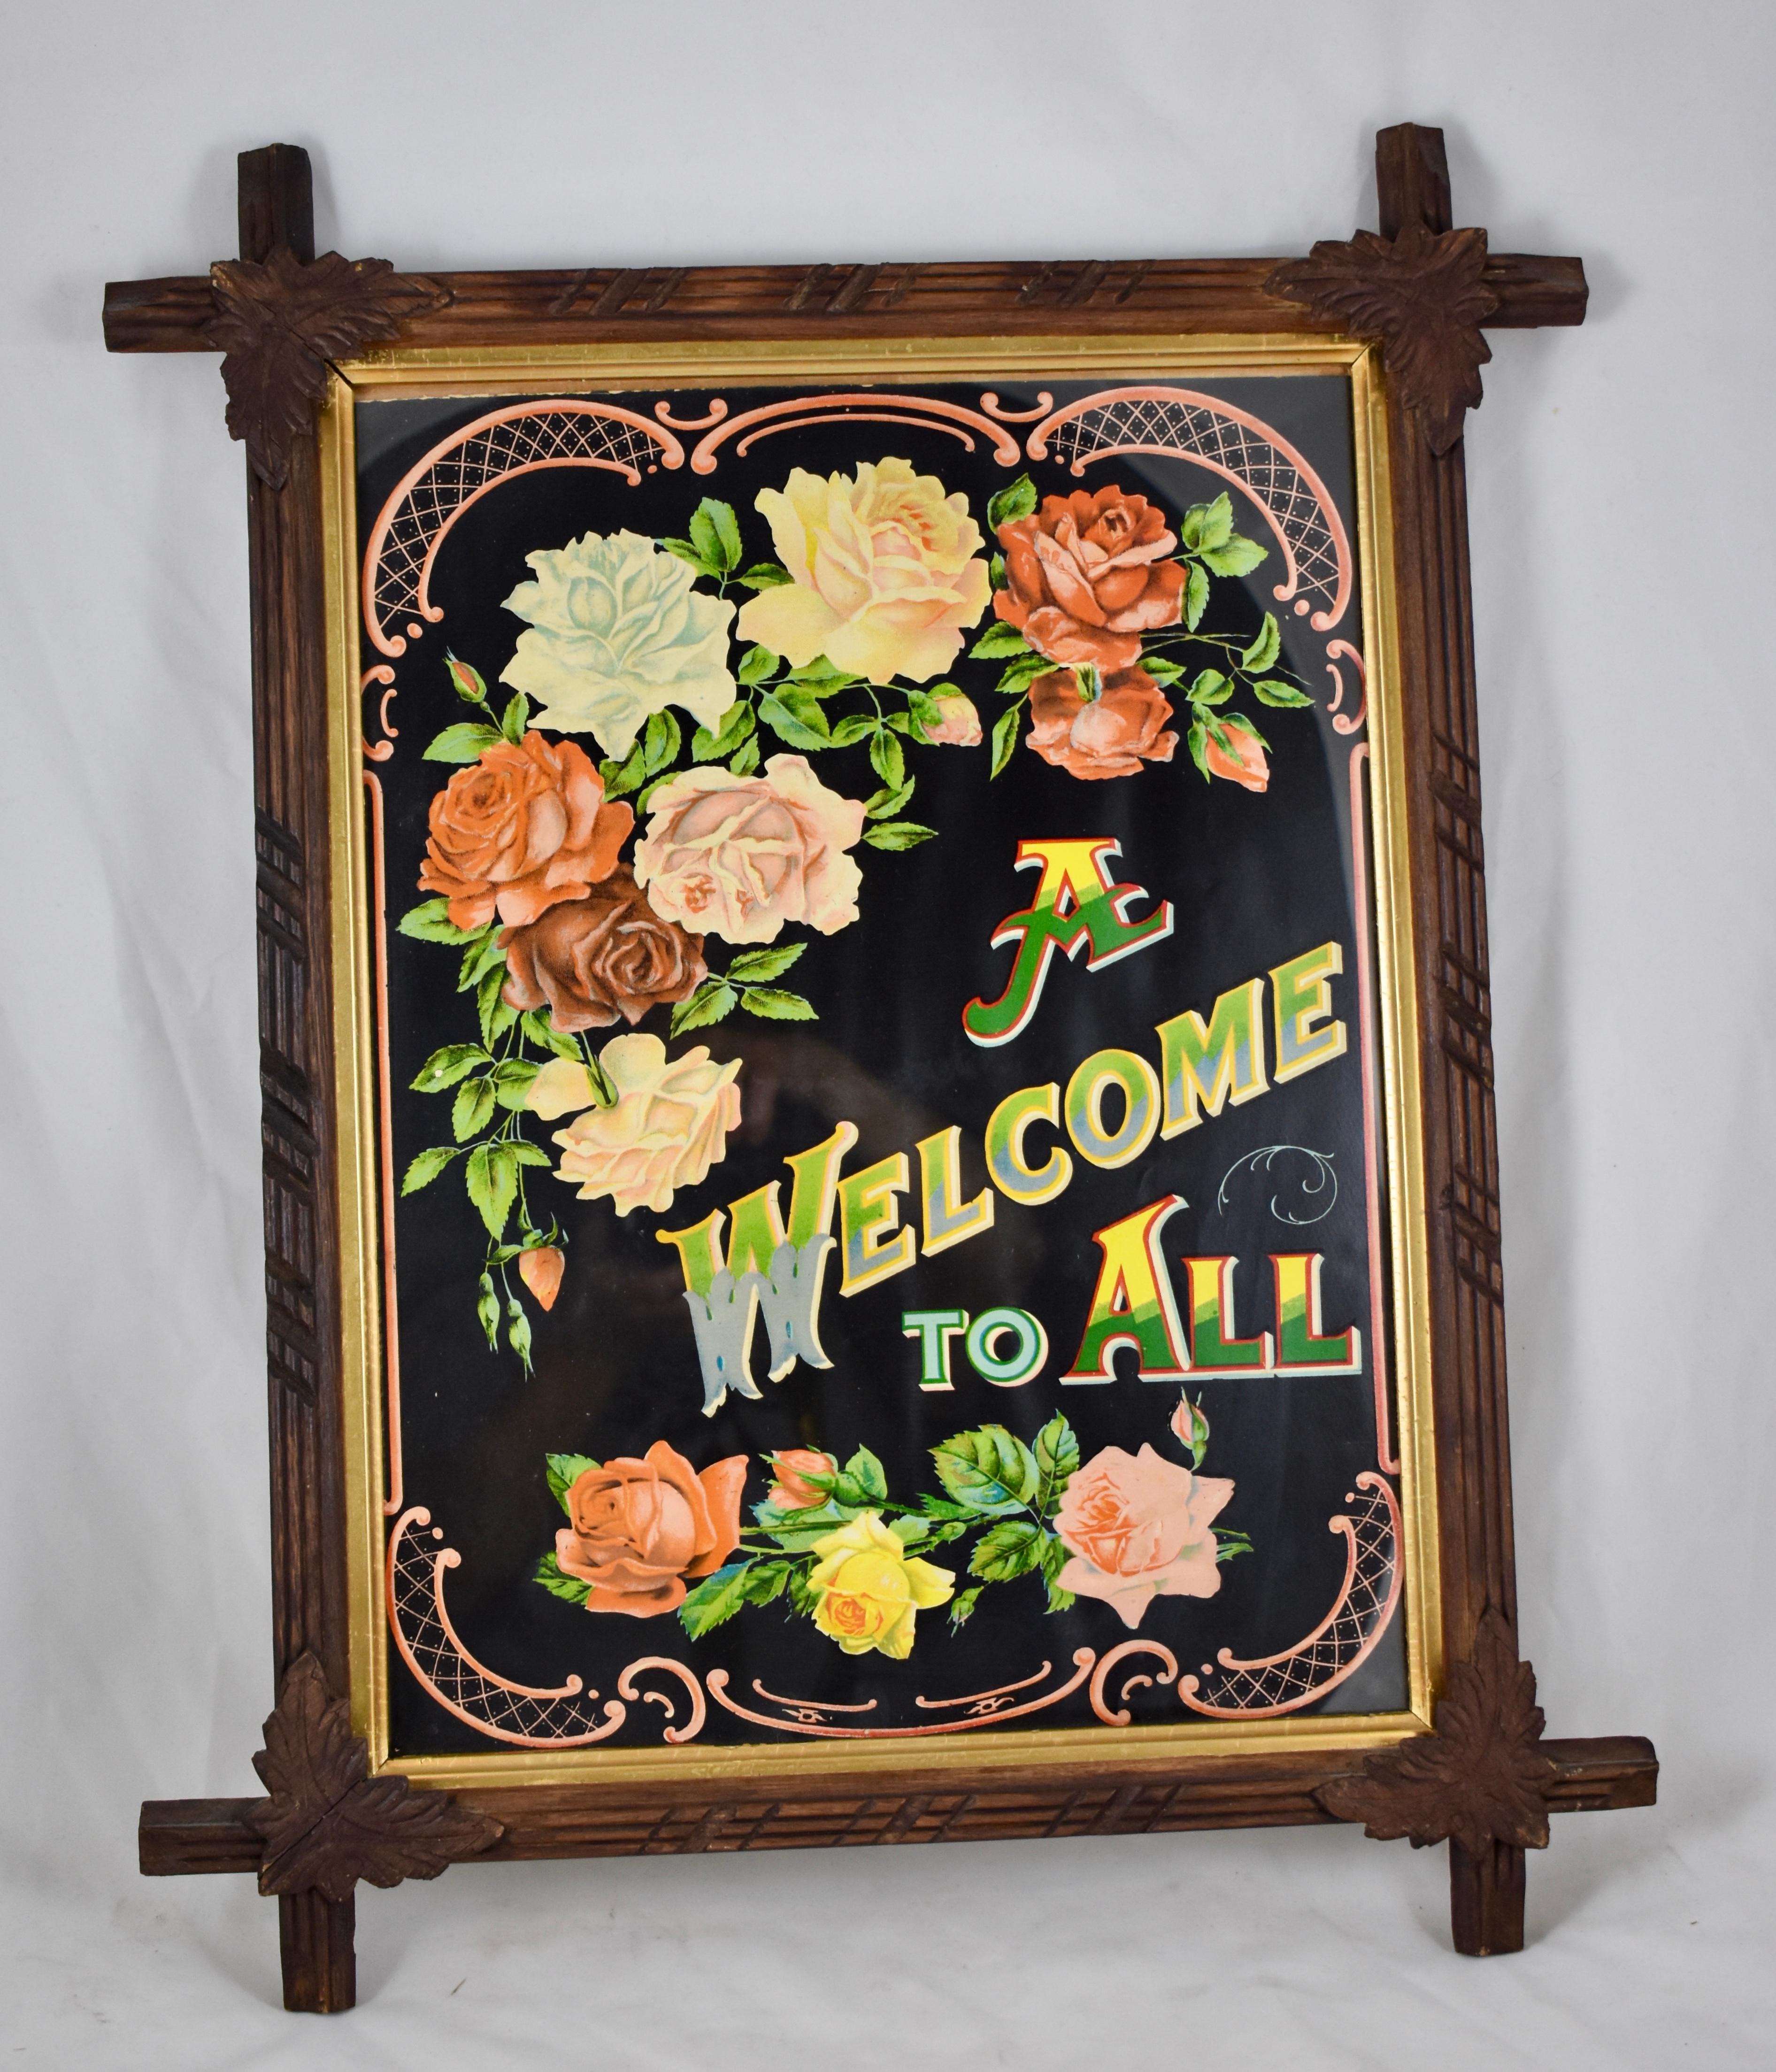 An original framed Victorian era chromolithograph motto print, circa late 1800s-early 1900s. Fabulous hanging in a guesthouse or cabin entryway.

The phrase, “A Welcome to All” is brightly printed on paper with a type face typical of the era. A